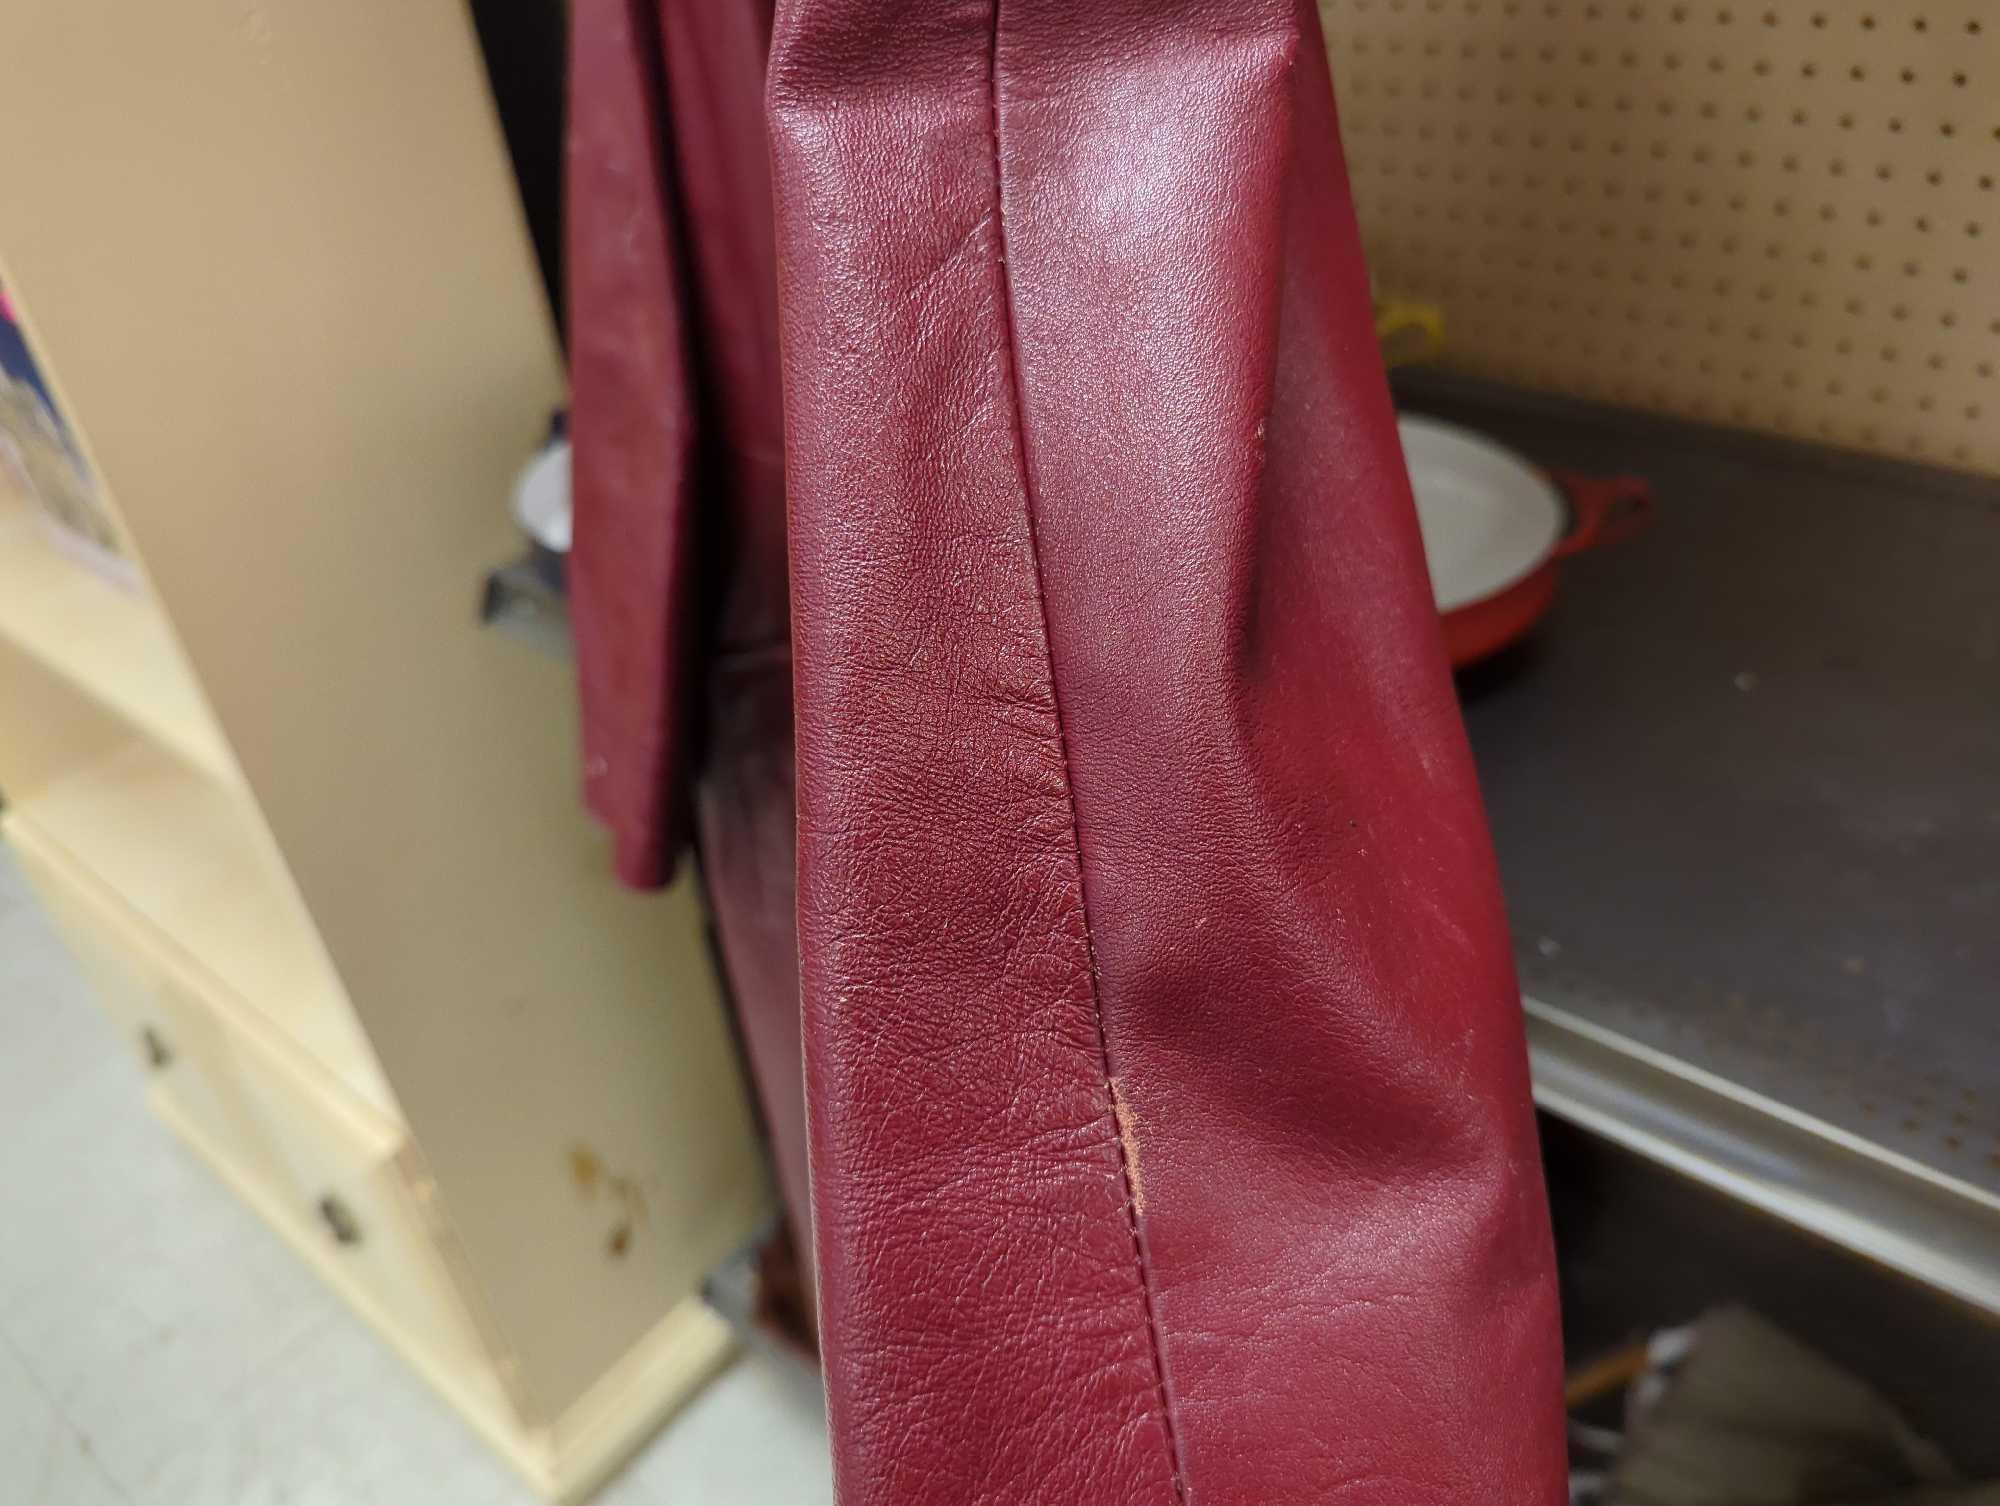 Red Leather Trench Coat Leather by Dan di Modes, Women's Size 16, Retail Price Value $85, What you